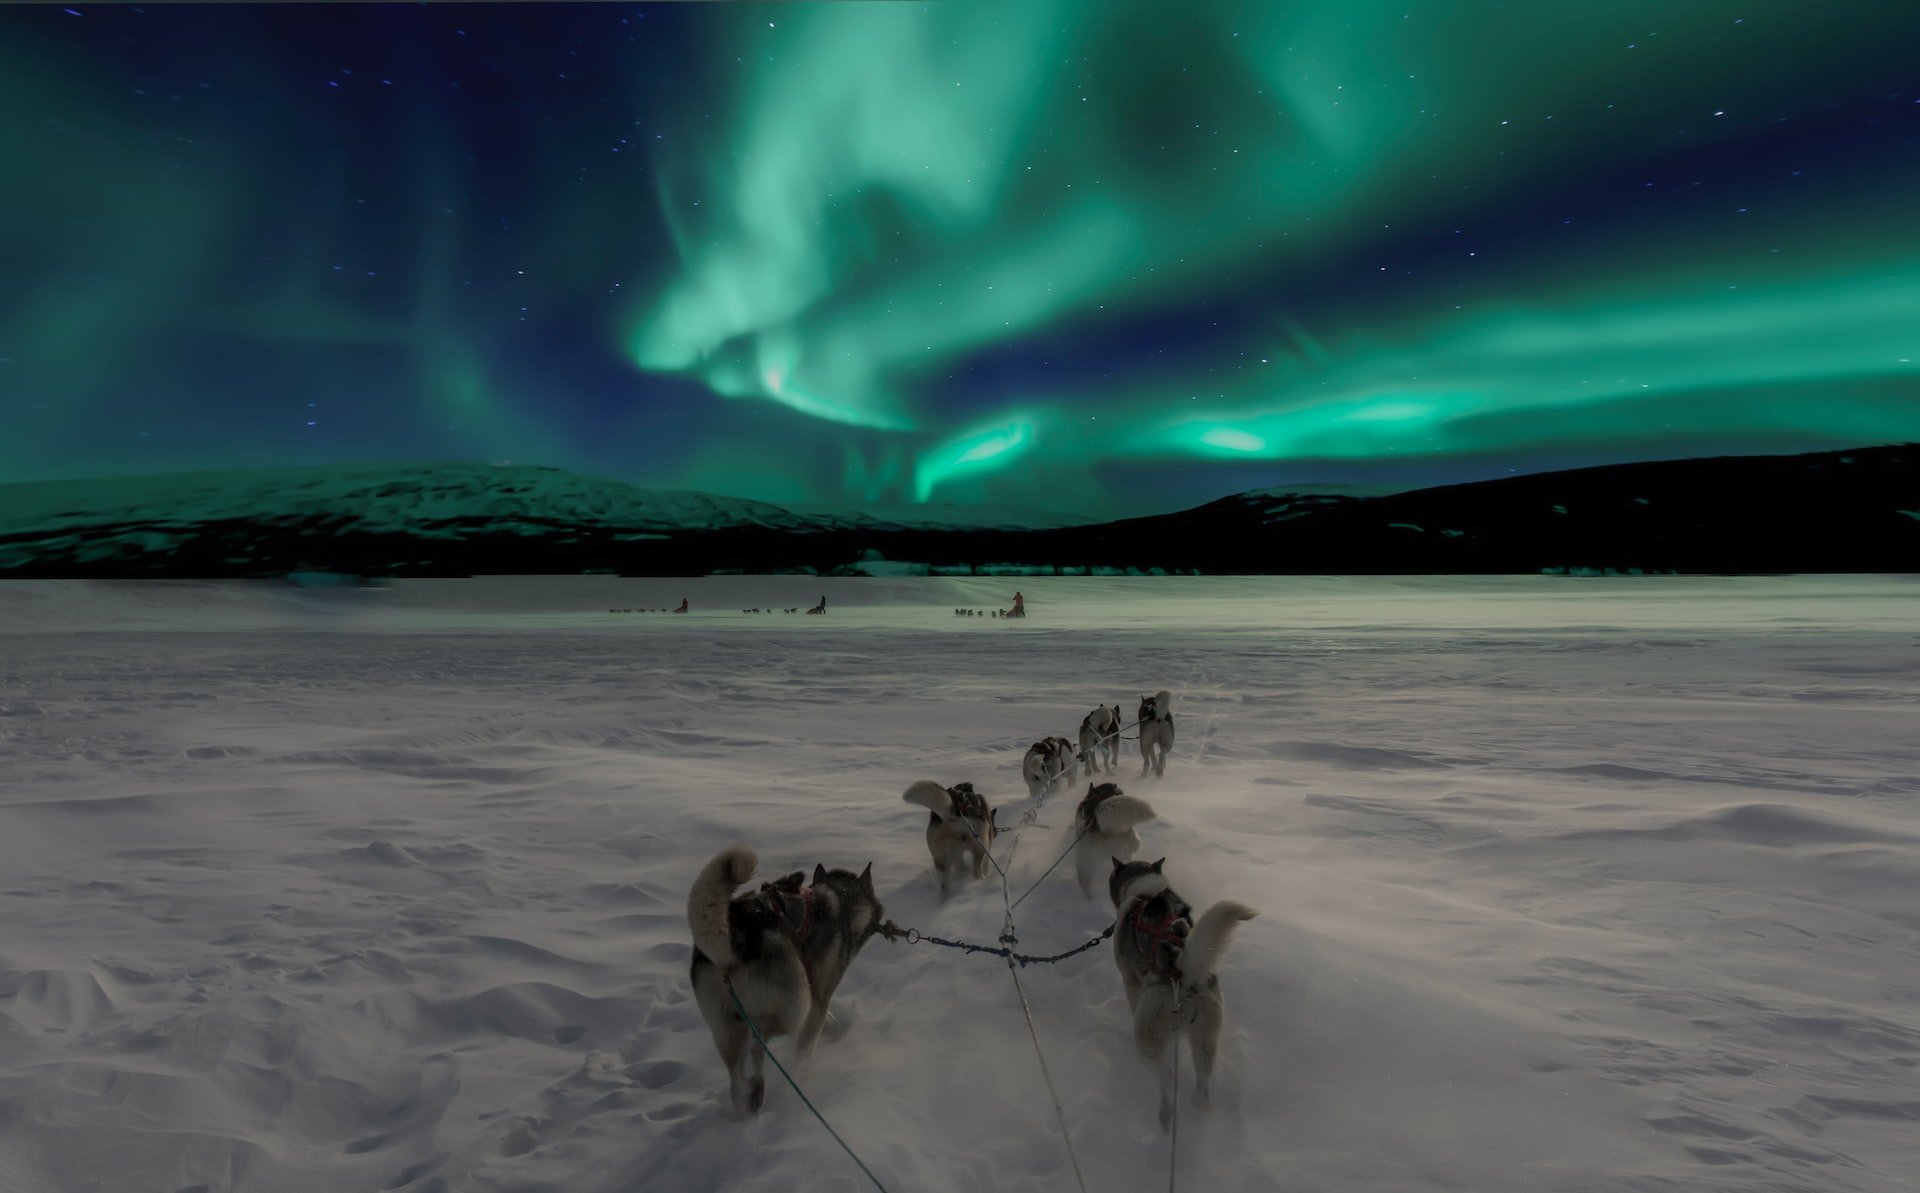 Pictured is a pack of dogs pulling a sledge beneath the Northern Lights in Norway.